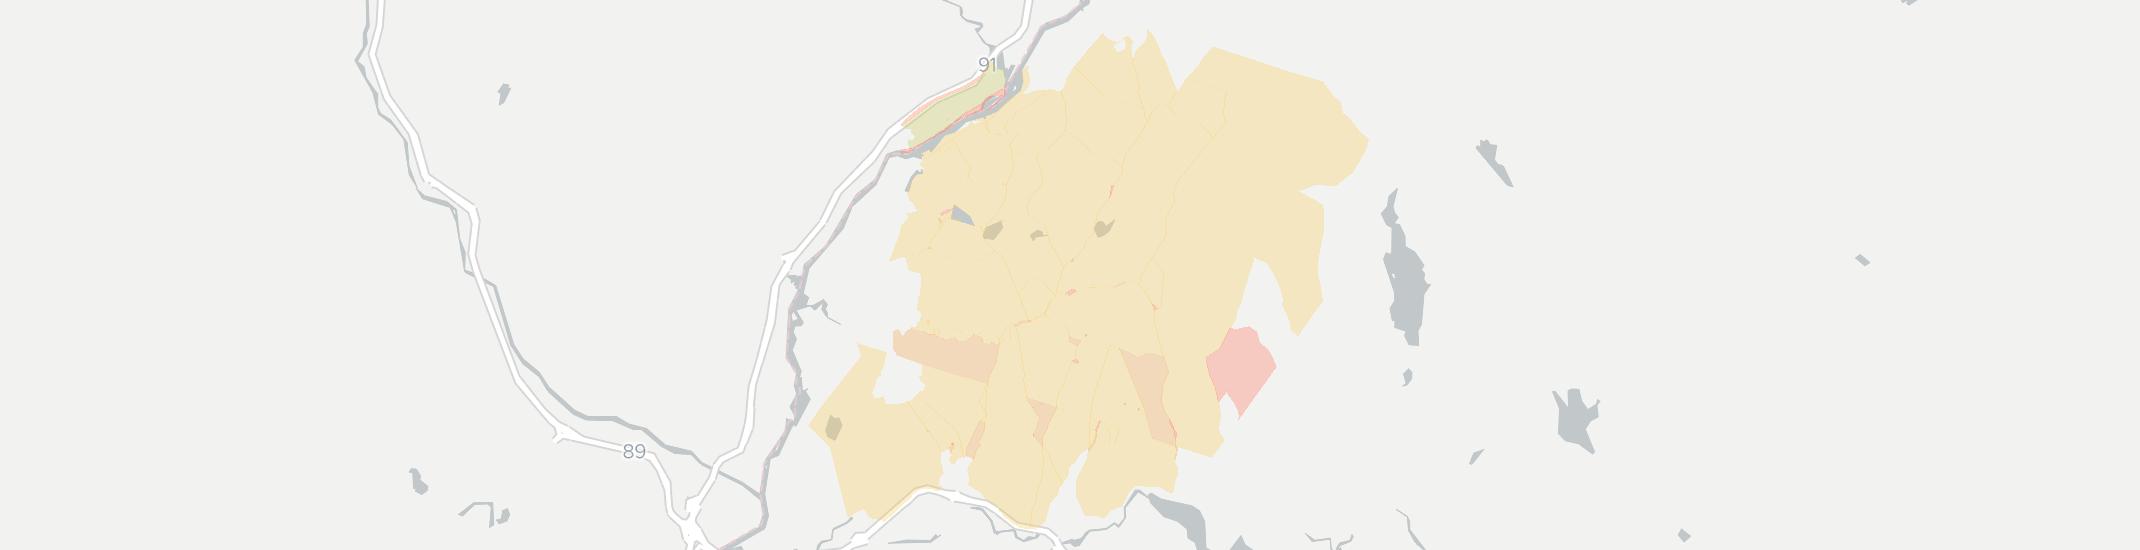 Etna Internet Competition Map. Click for interactive map